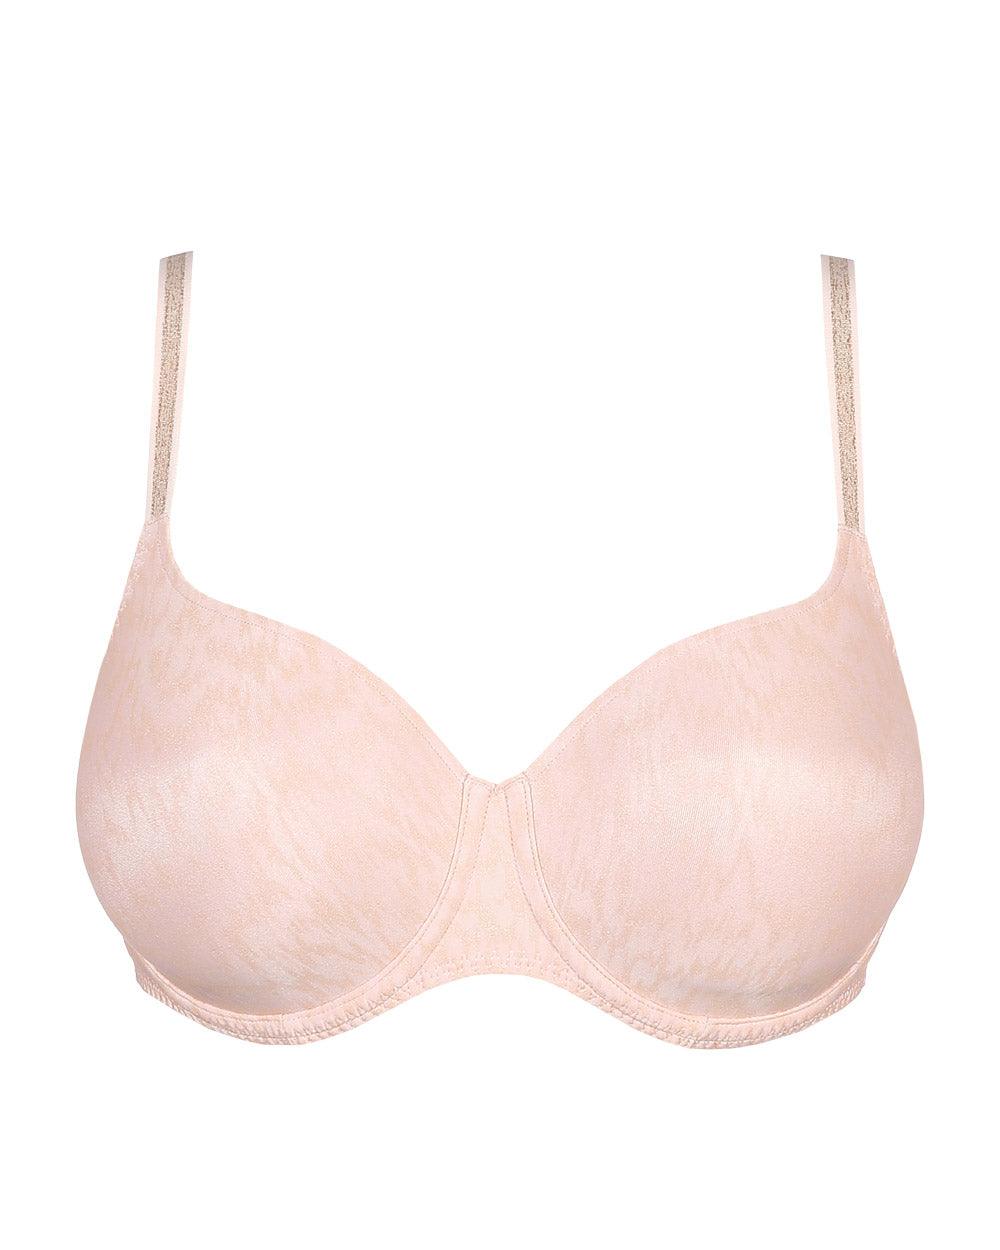 COMFORT CHOICE BRA, SIZE 44A ID#271650-4) Pink Blush, New In Package